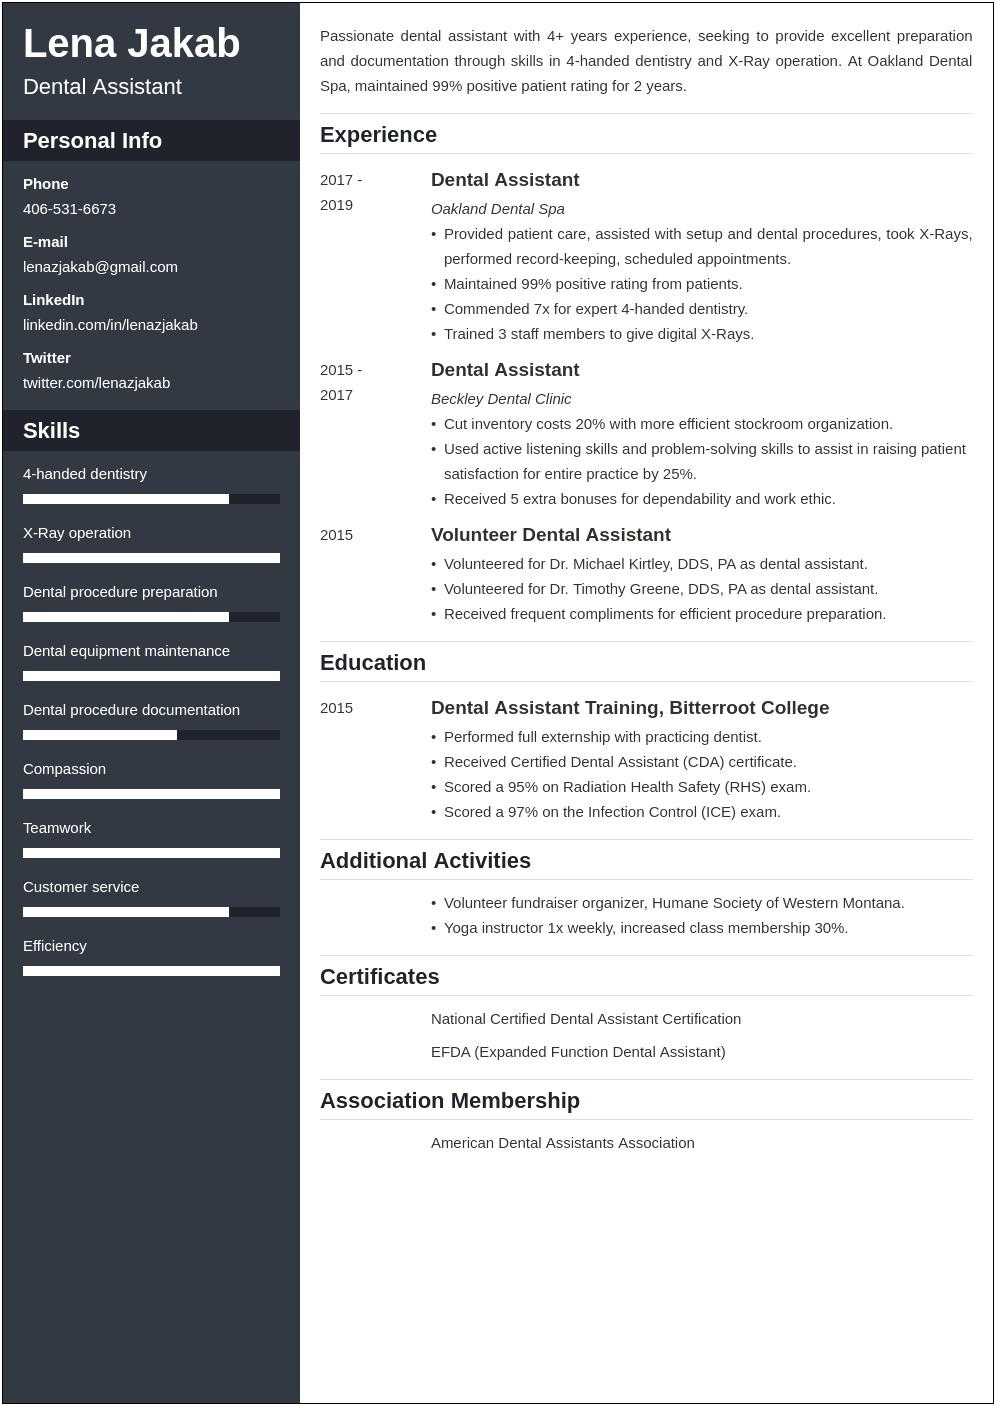 Professional Summary For Dental Assistant Resume